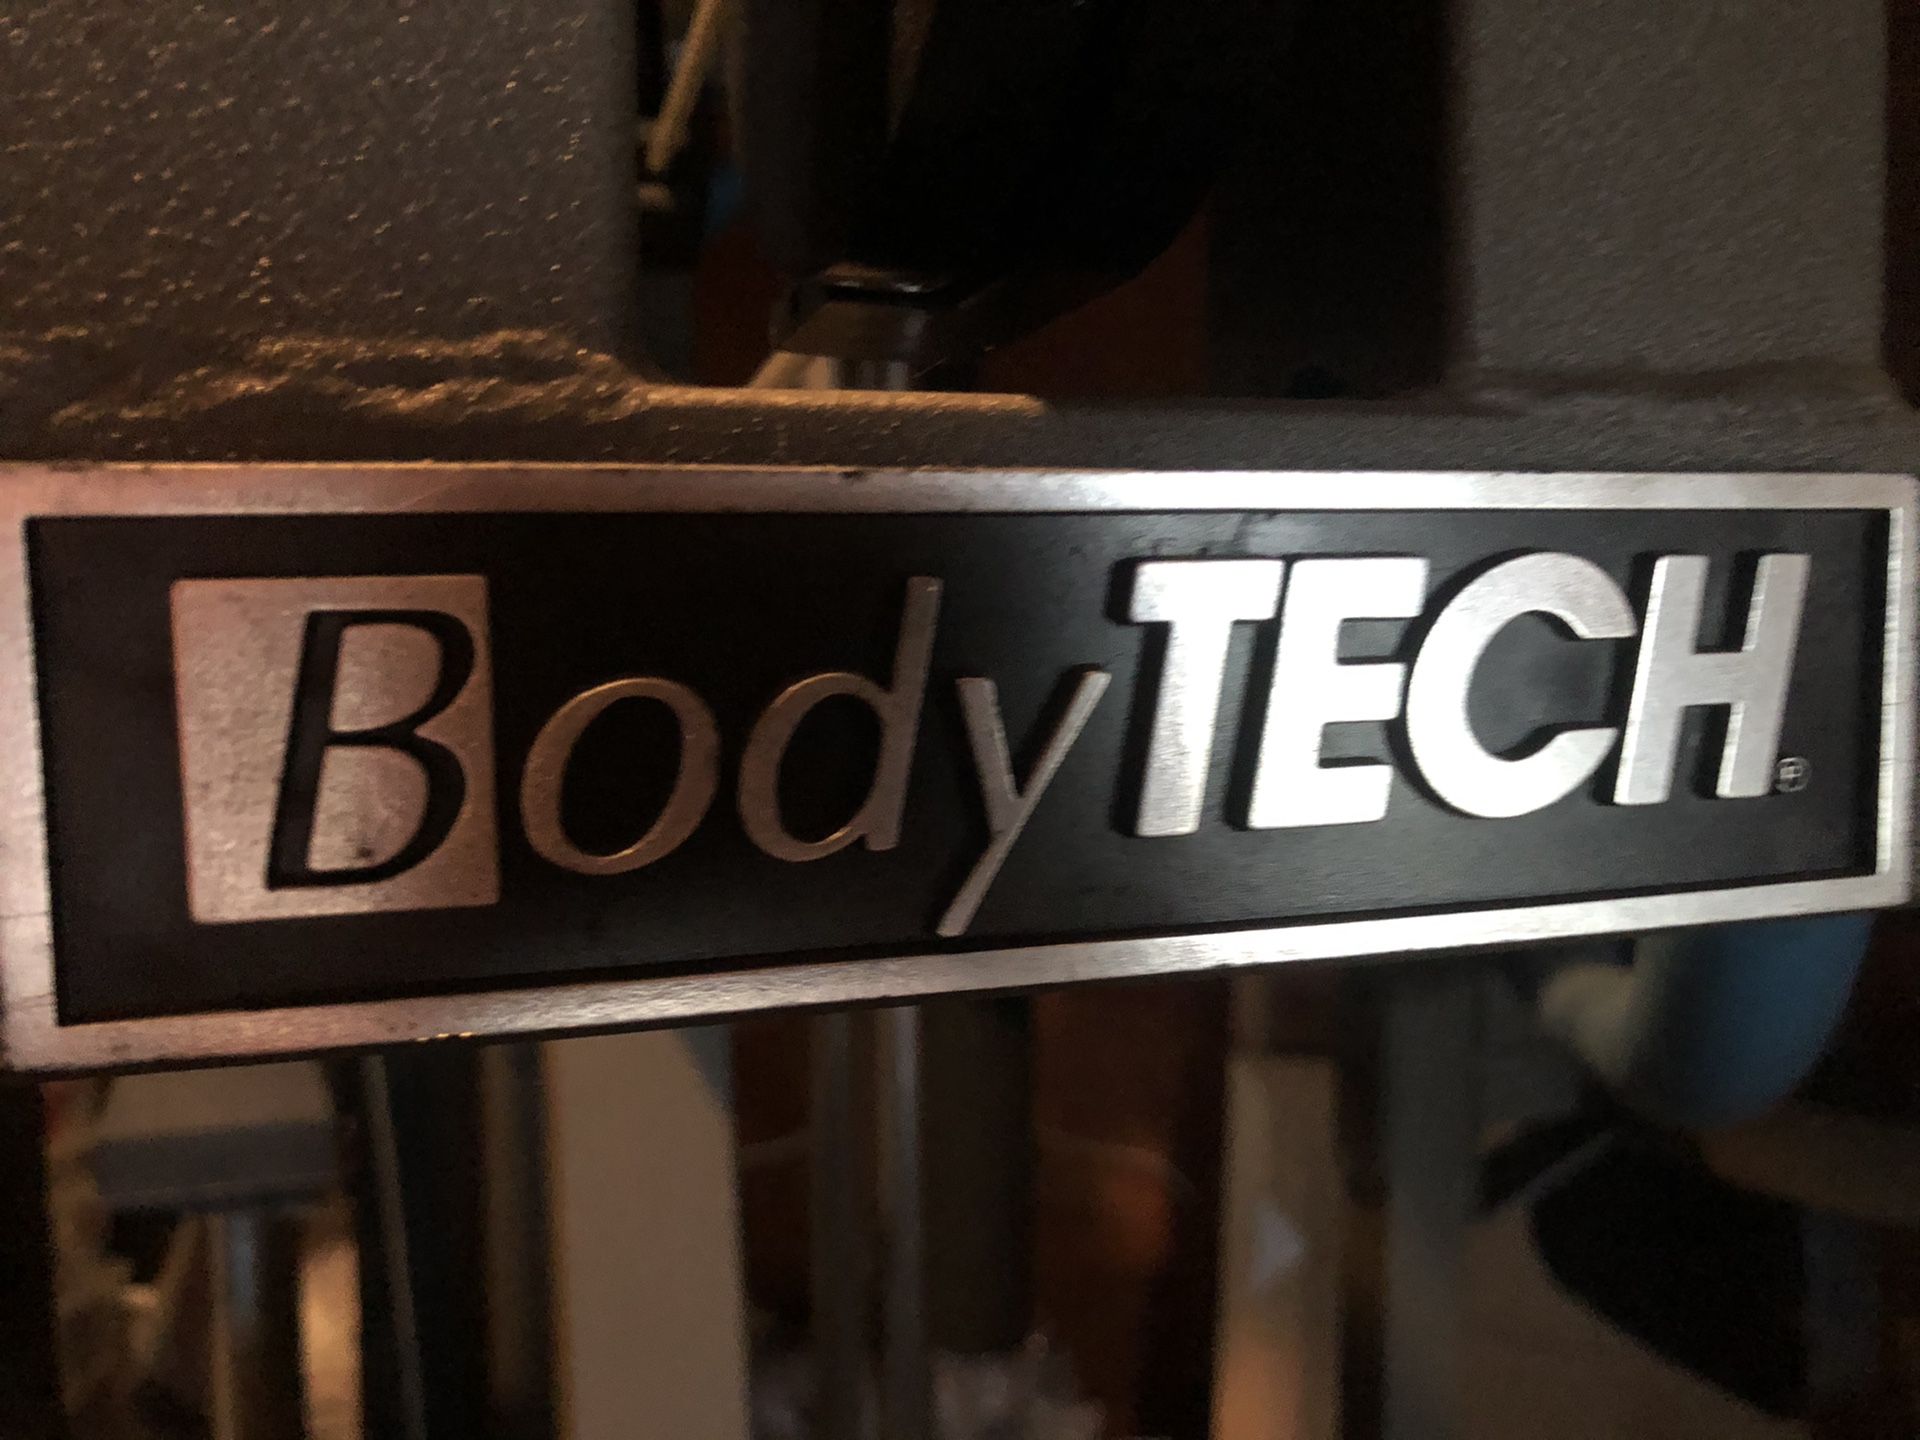 Body tech universal gym. Lots of different exercises you can do. Full body. Heavy duty equipment. Great condition. Taking up space in my garage that